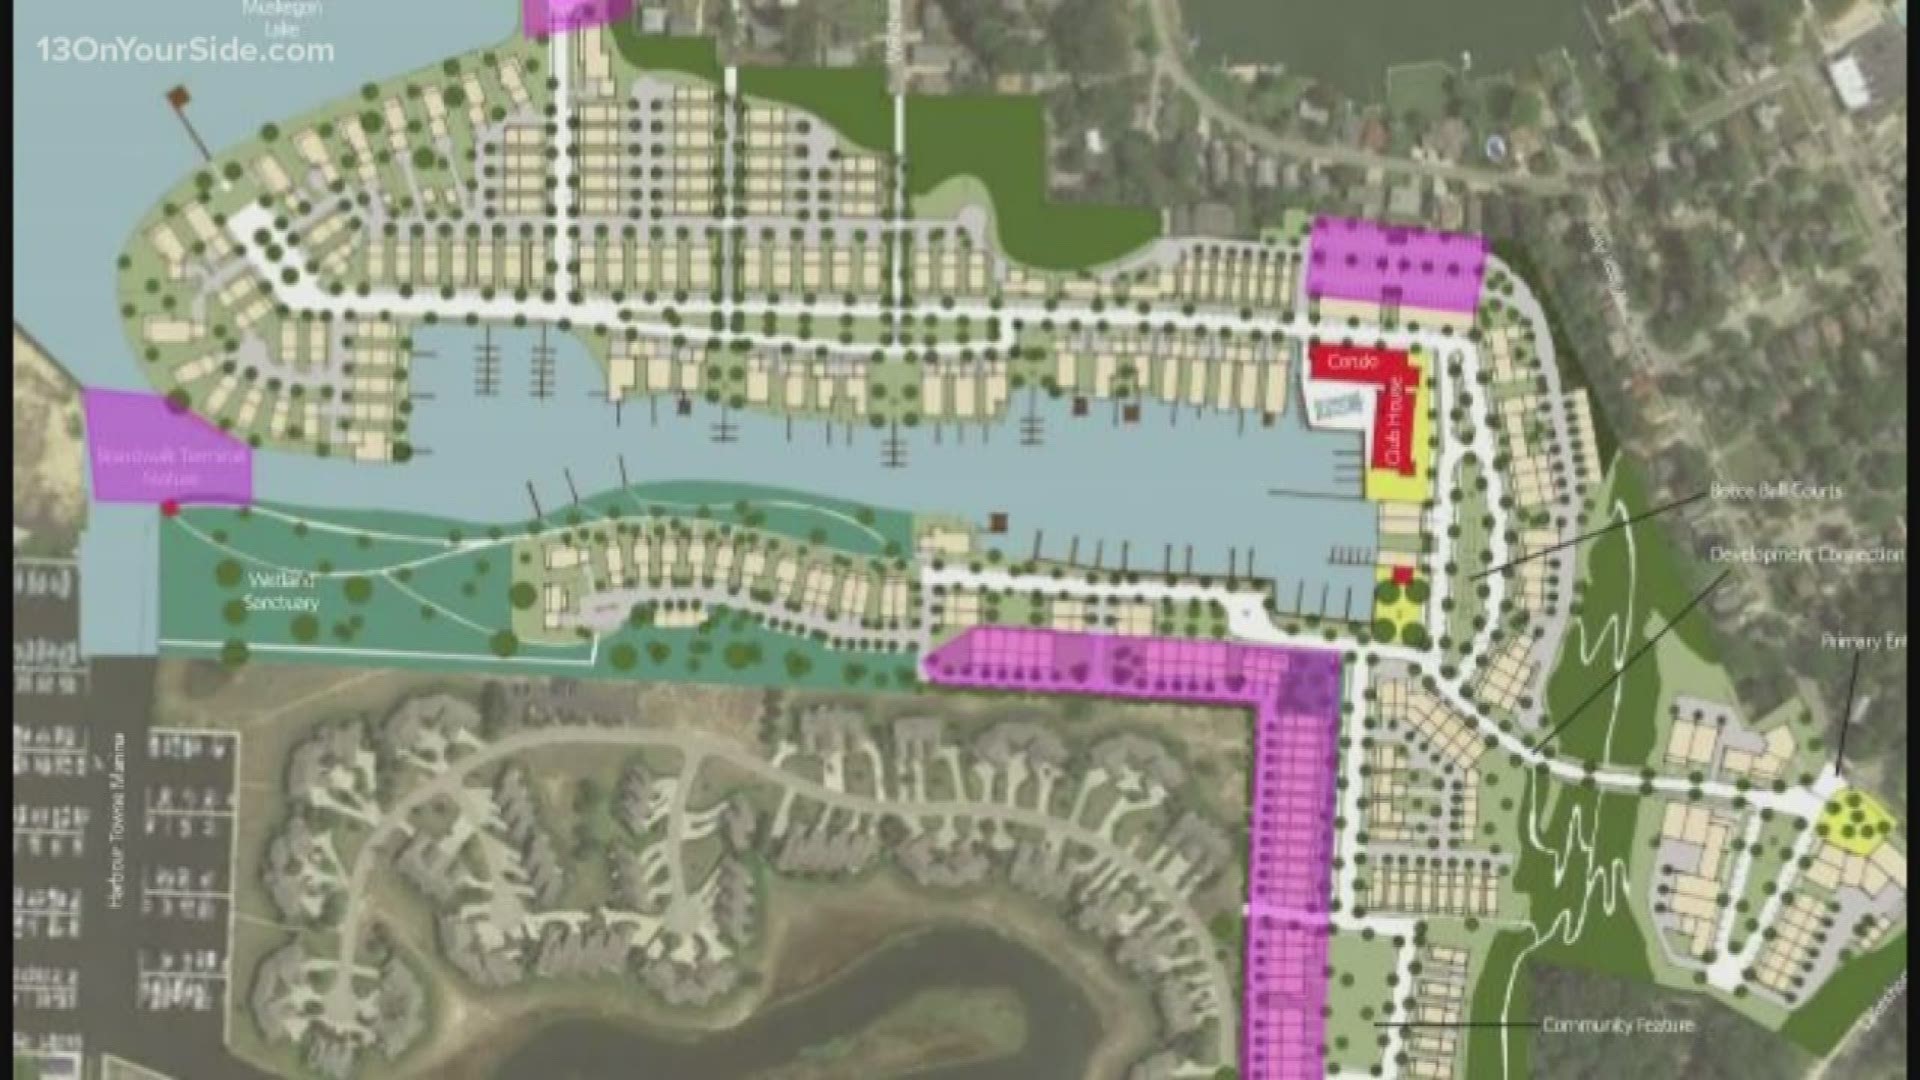 "The Docks" project would create 240 homes on 80 acres of land in the Beachwood-Bluffton neighborhood.